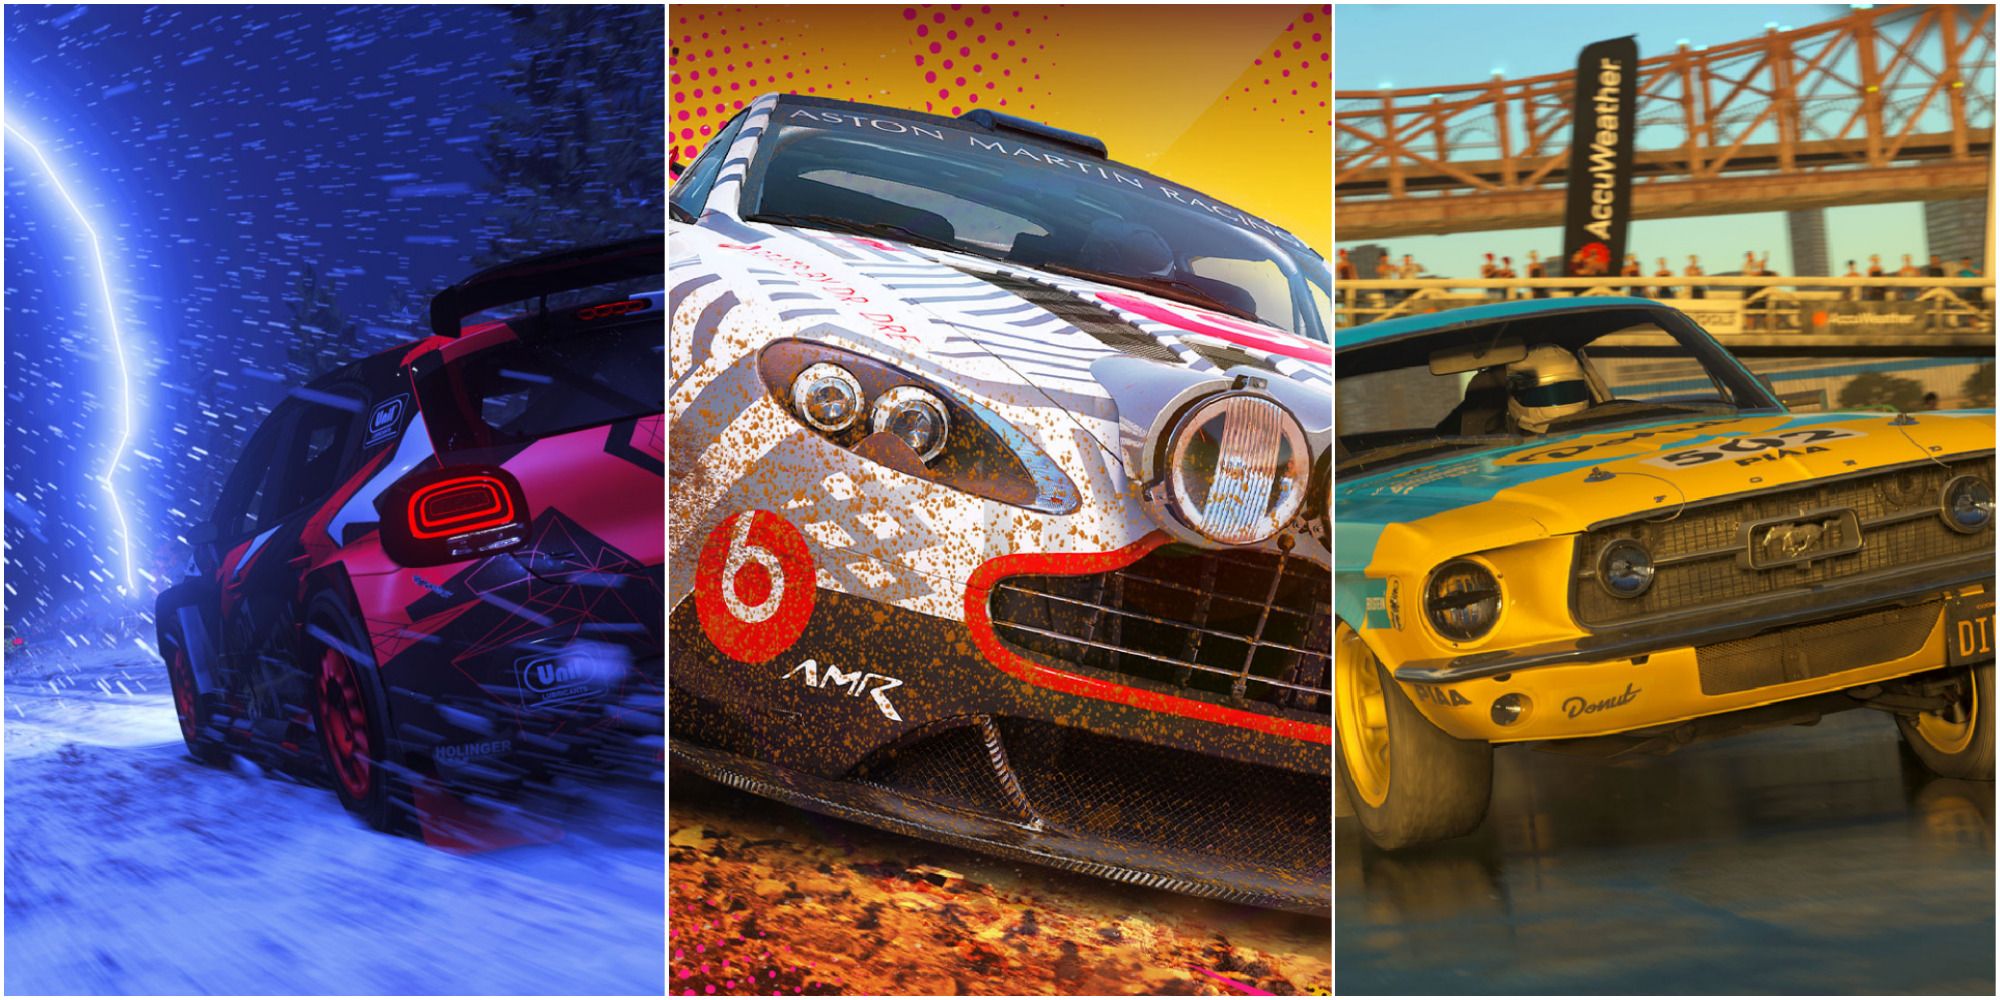 Three screenshots from Dirt 5, showing a car driving through snow and lightning; a car drifting on a colored background; and a car taking a tight turn in New York City